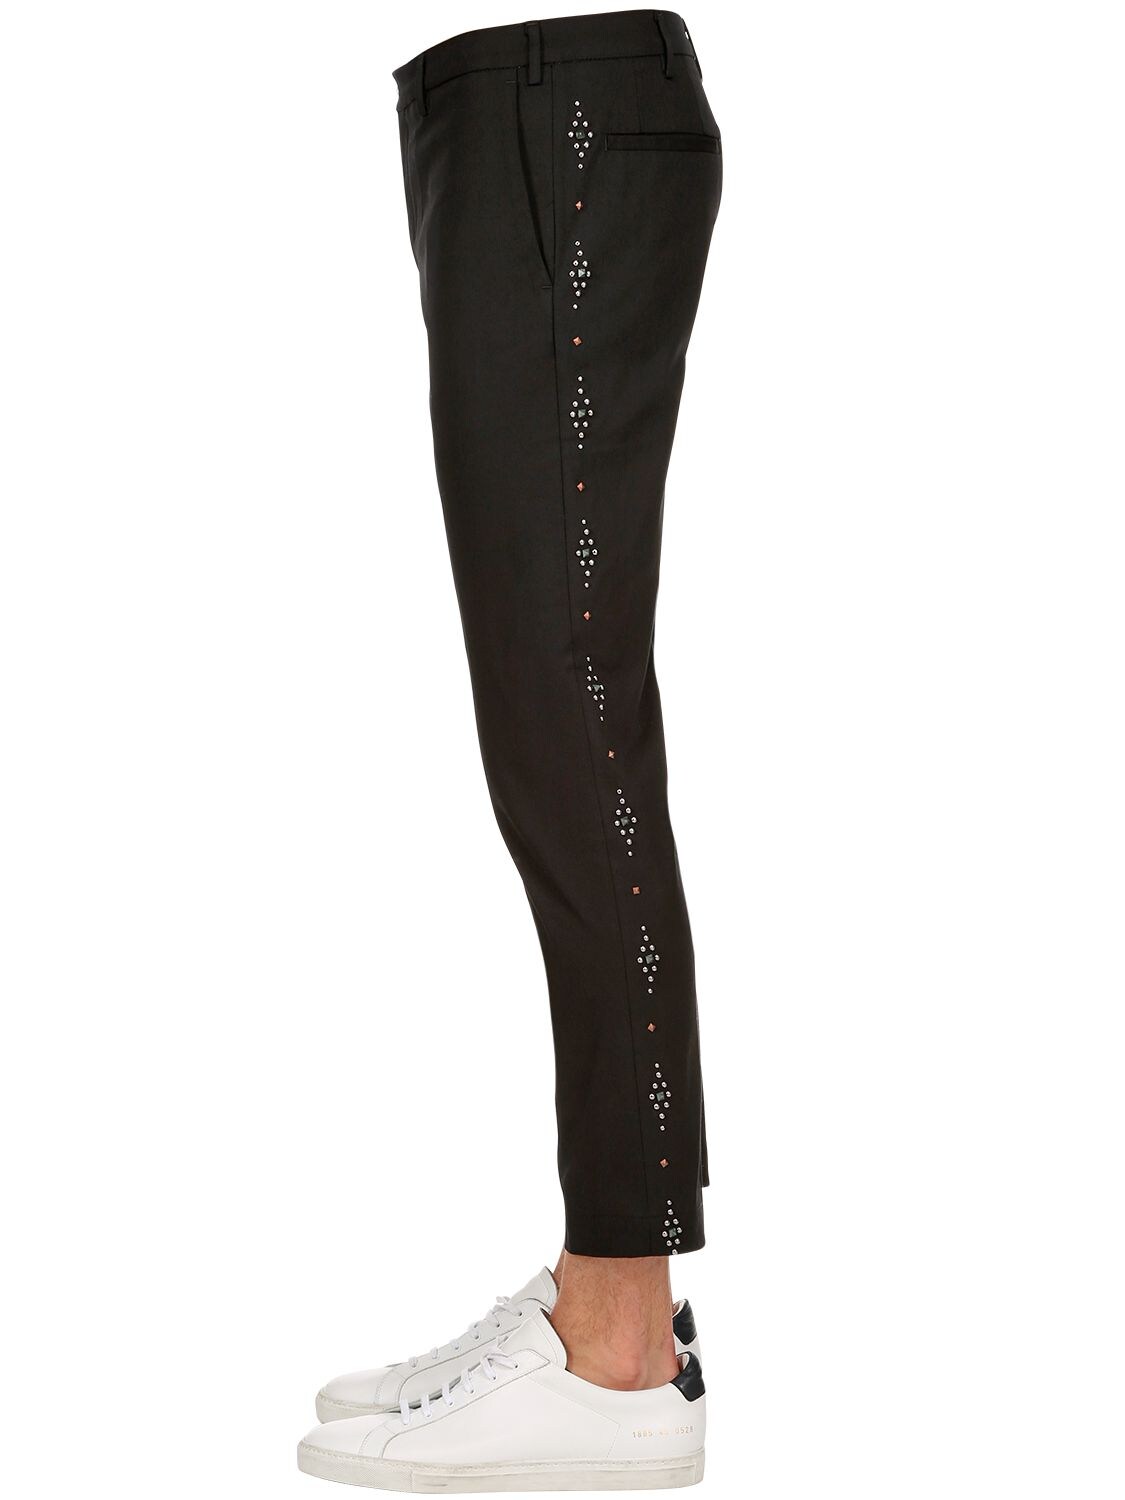 Selectio Studded Sides Cotton Blend Pants In Black